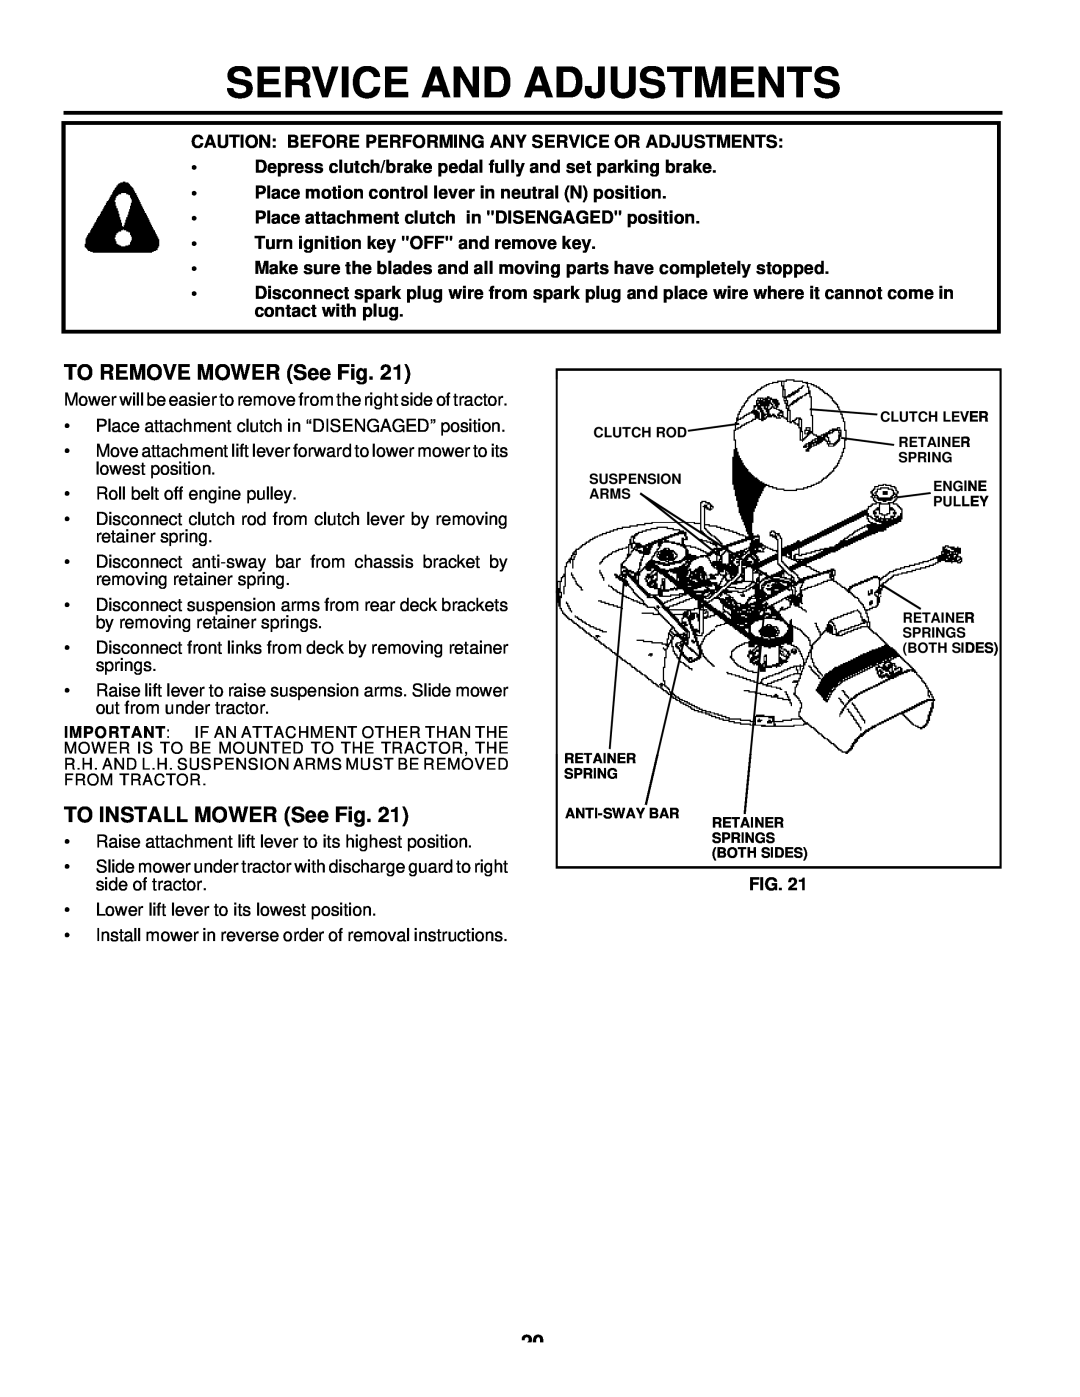 Husqvarna LTH125 owner manual Service And Adjustments, TO REMOVE MOWER See Fig, TO INSTALL MOWER See Fig 